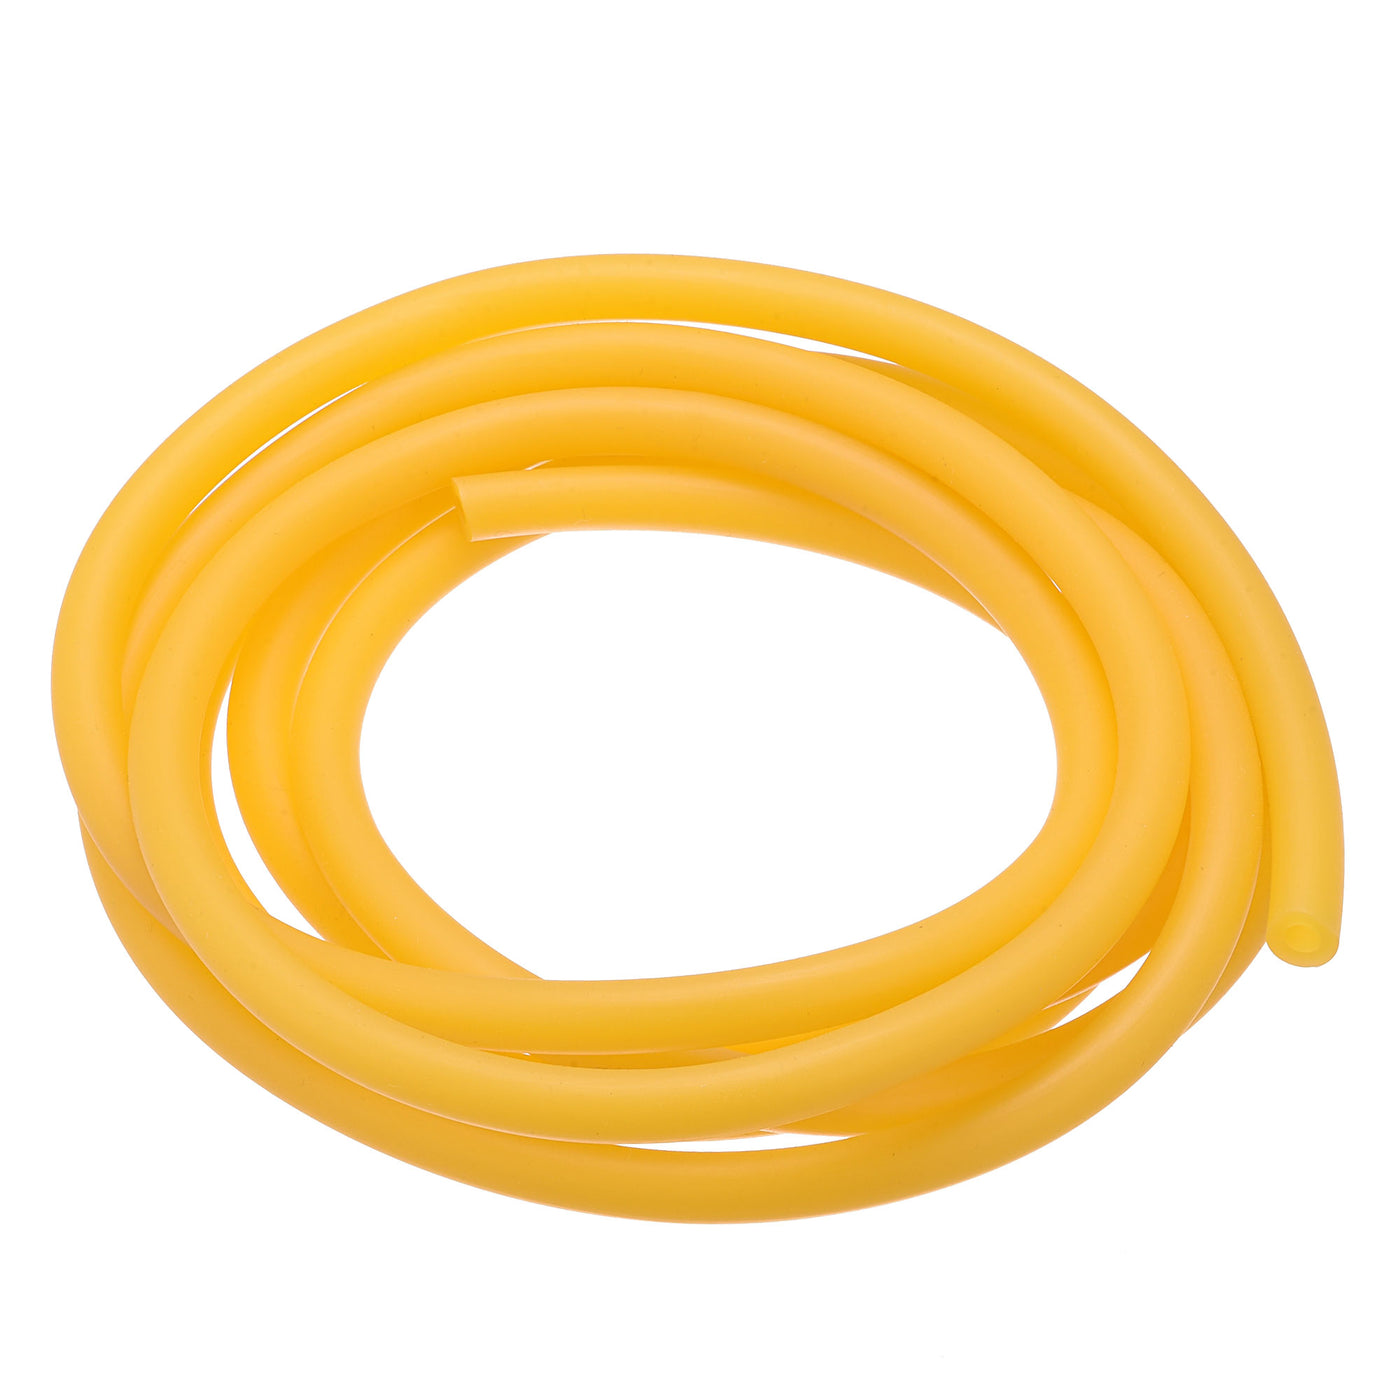 Harfington Natural Latex Rubber Tubing 5mm ID 10mm OD 10ft for Sports Exercise Fitness